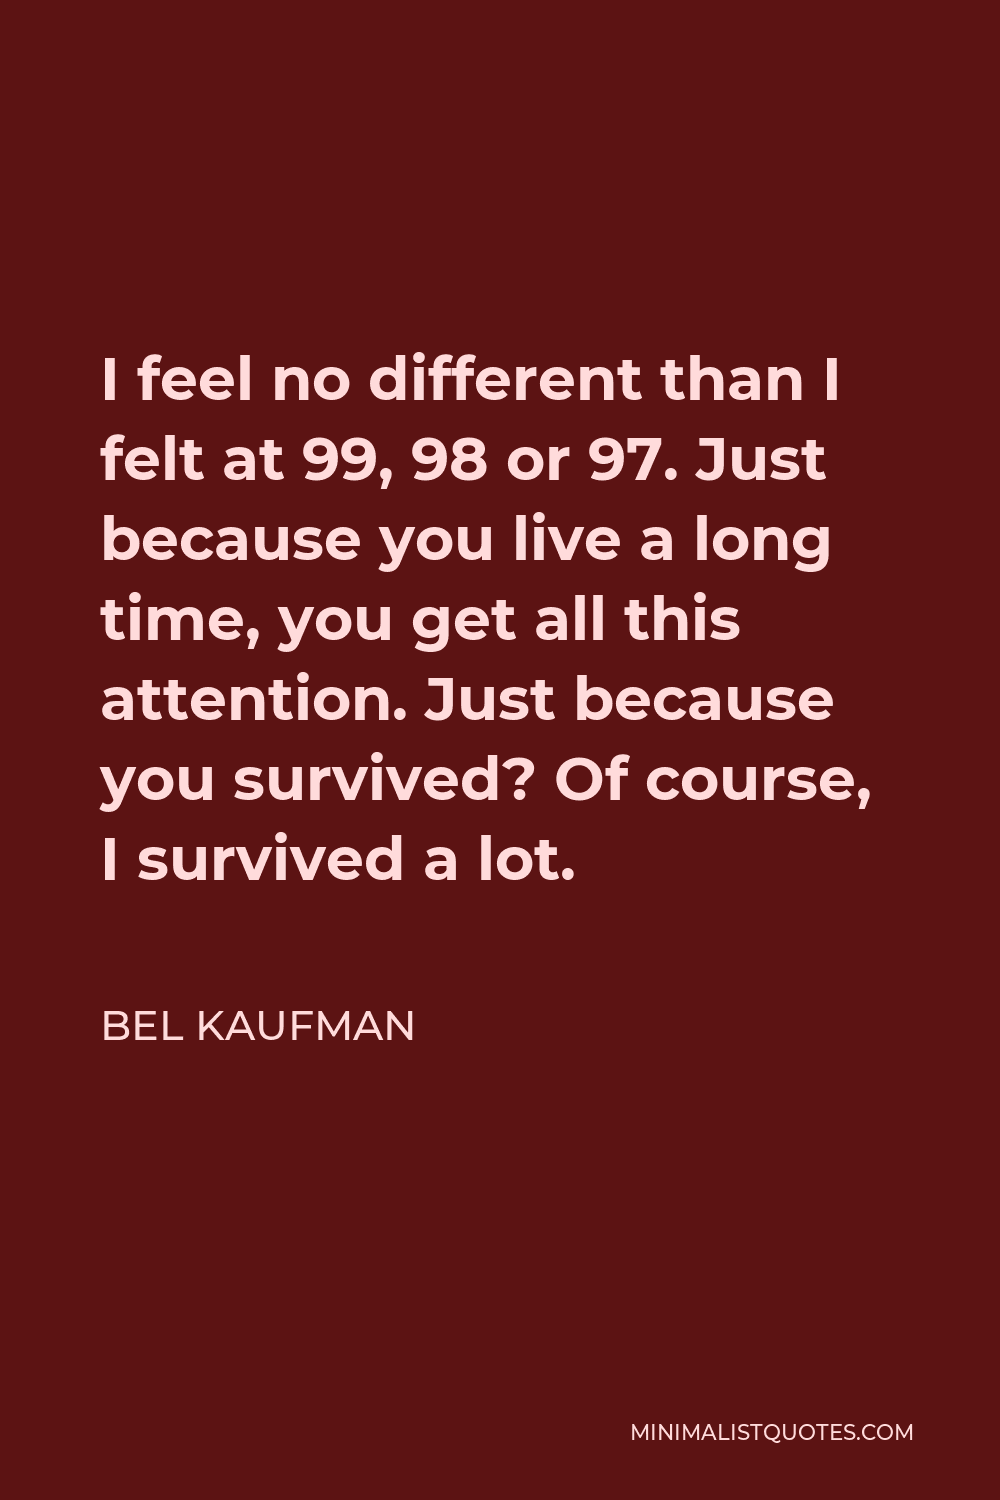 Bel Kaufman Quote - I feel no different than I felt at 99, 98 or 97. Just because you live a long time, you get all this attention. Just because you survived? Of course, I survived a lot.